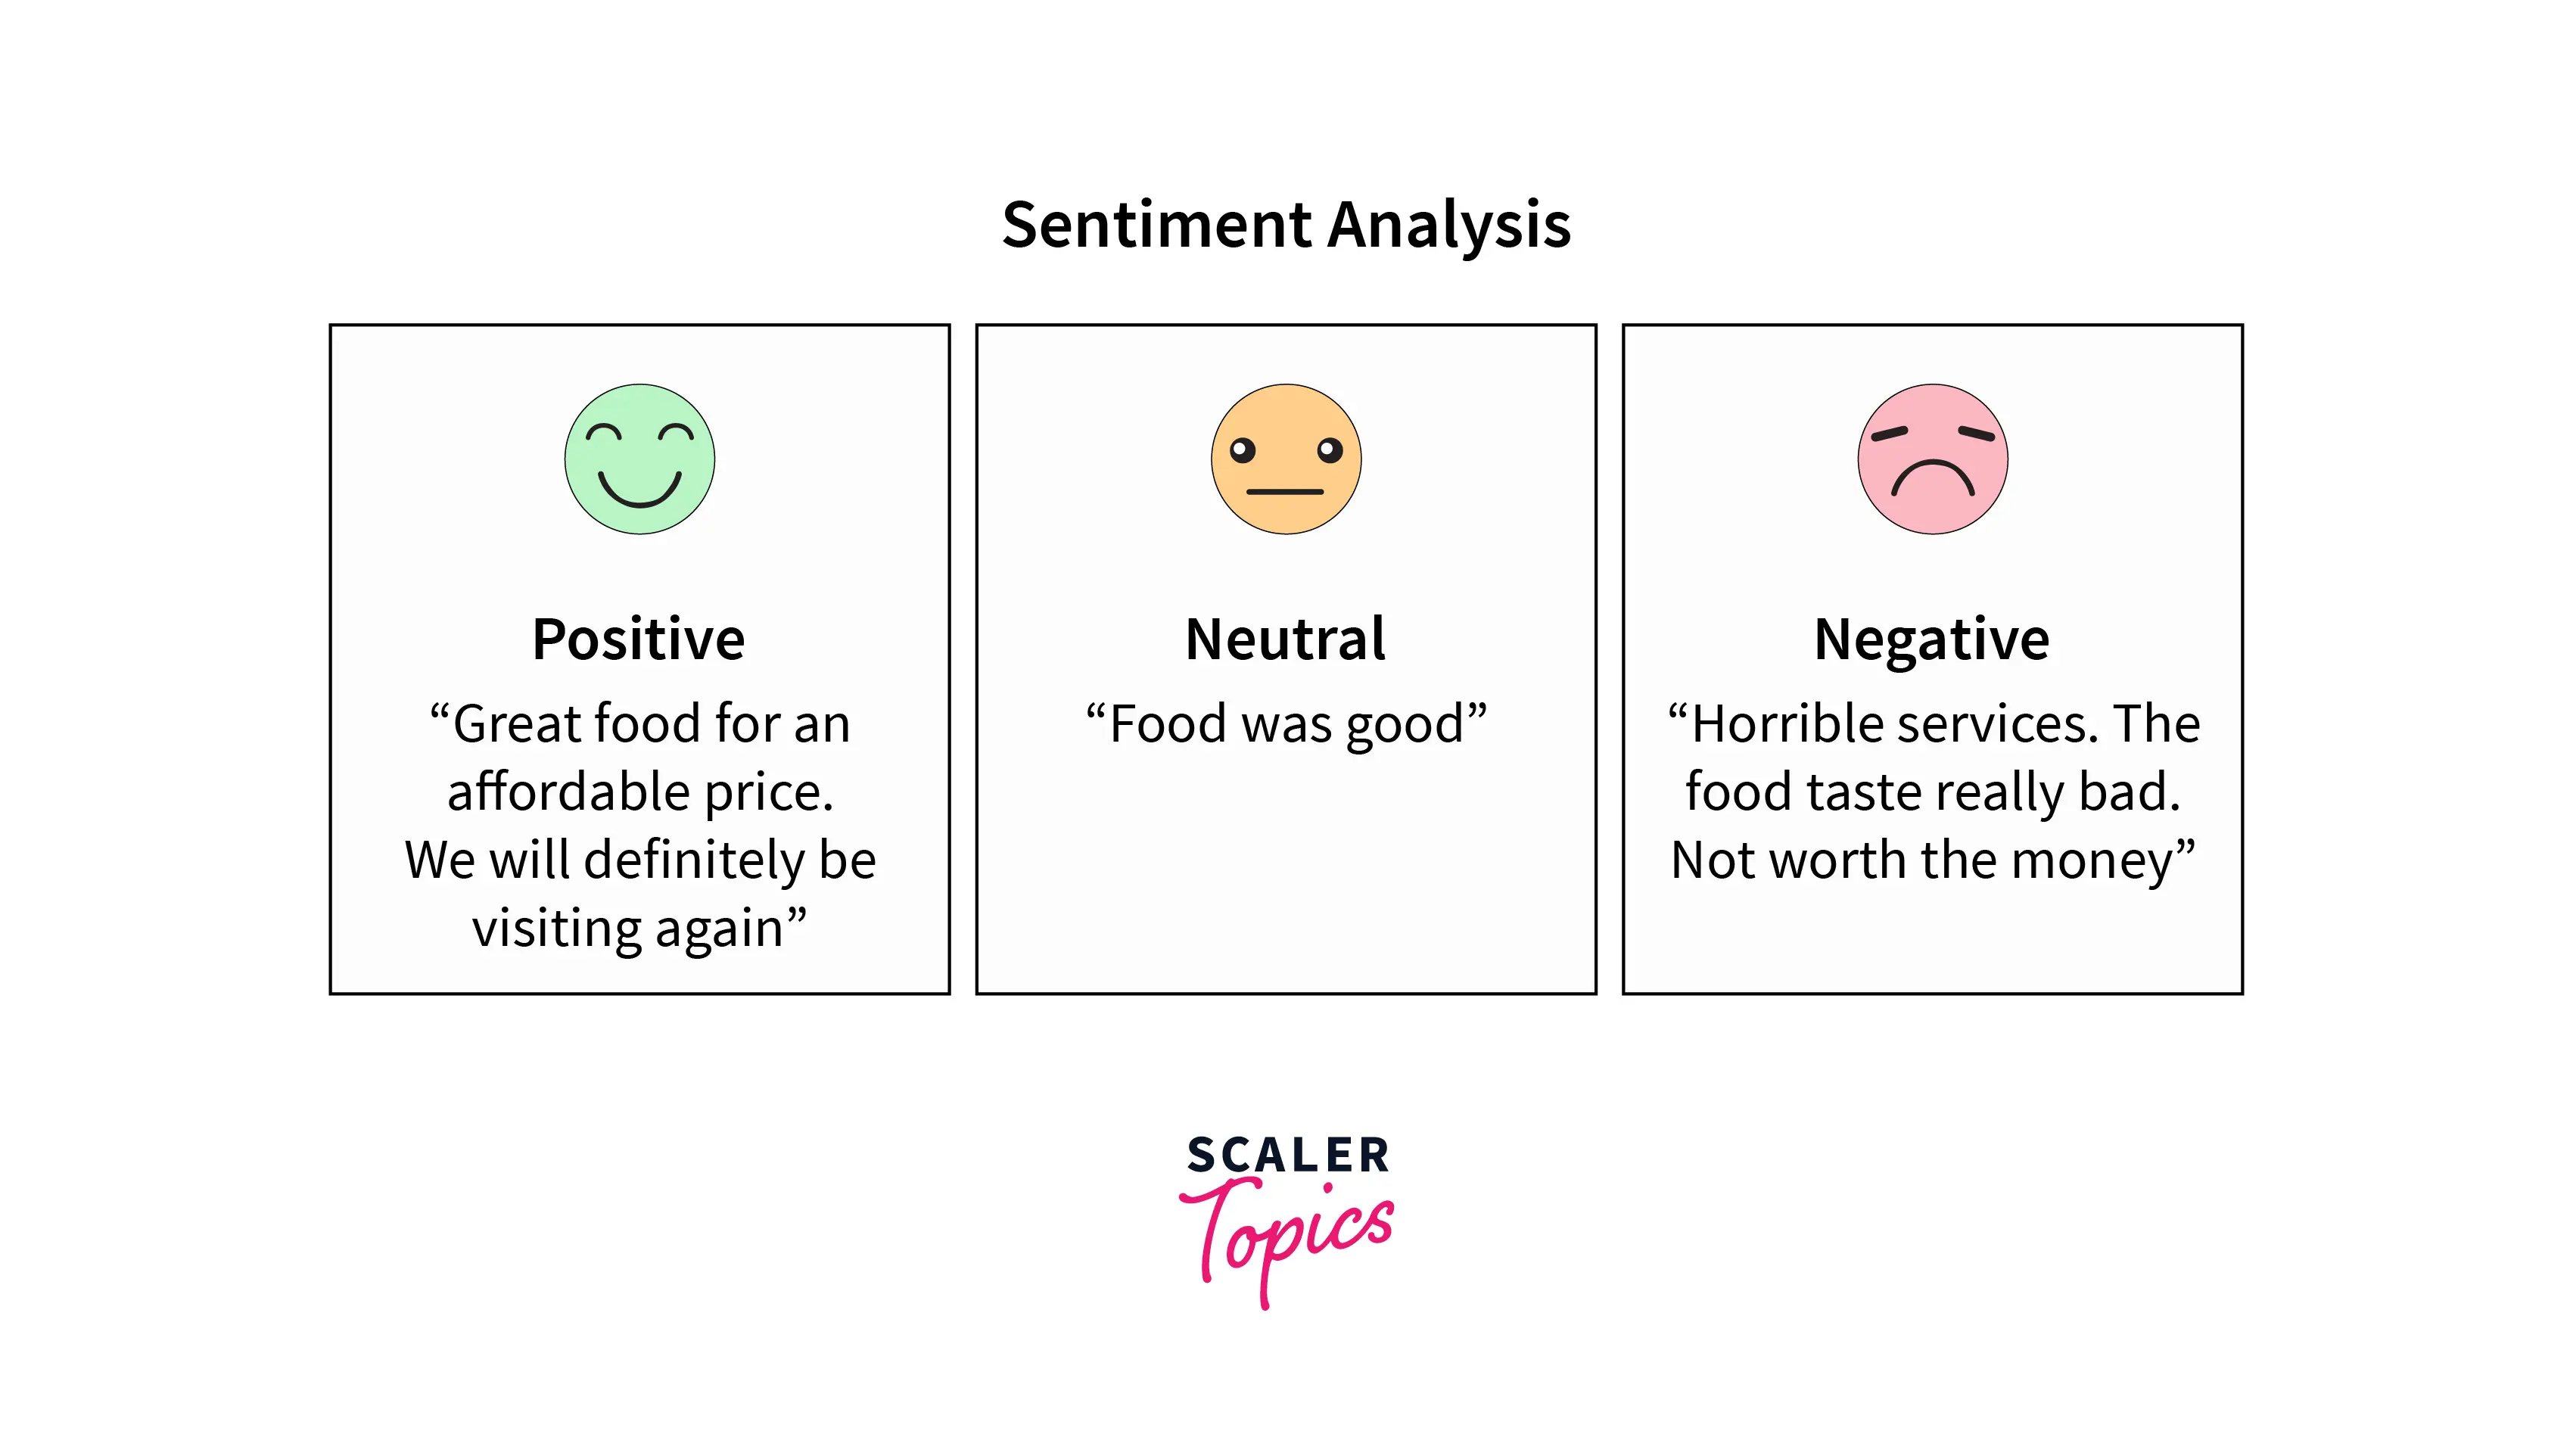 Overview of Social Media Sentiment Analysis